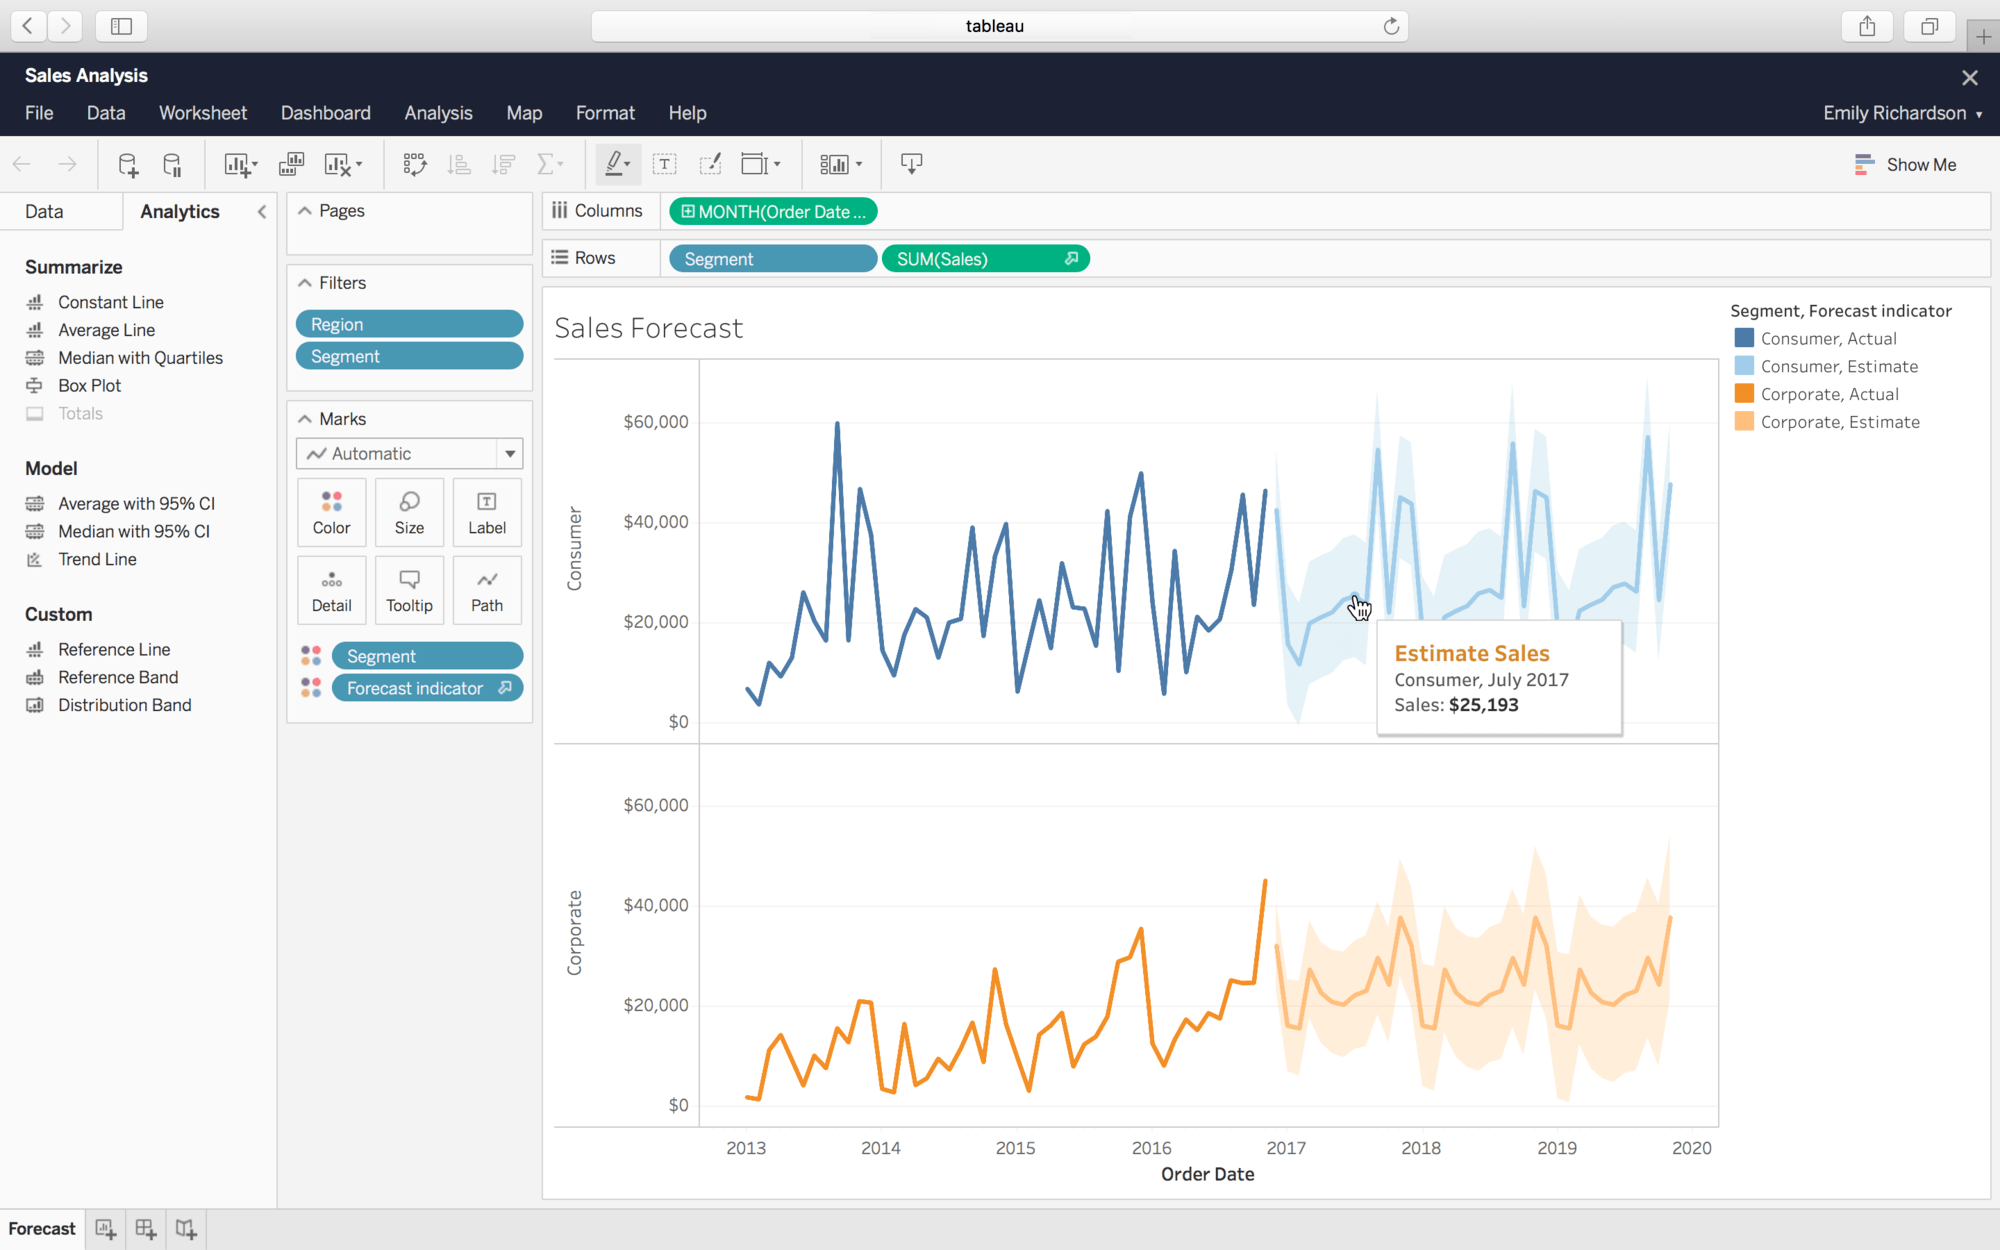 BI tool, with shining reporting and visualization capabilities